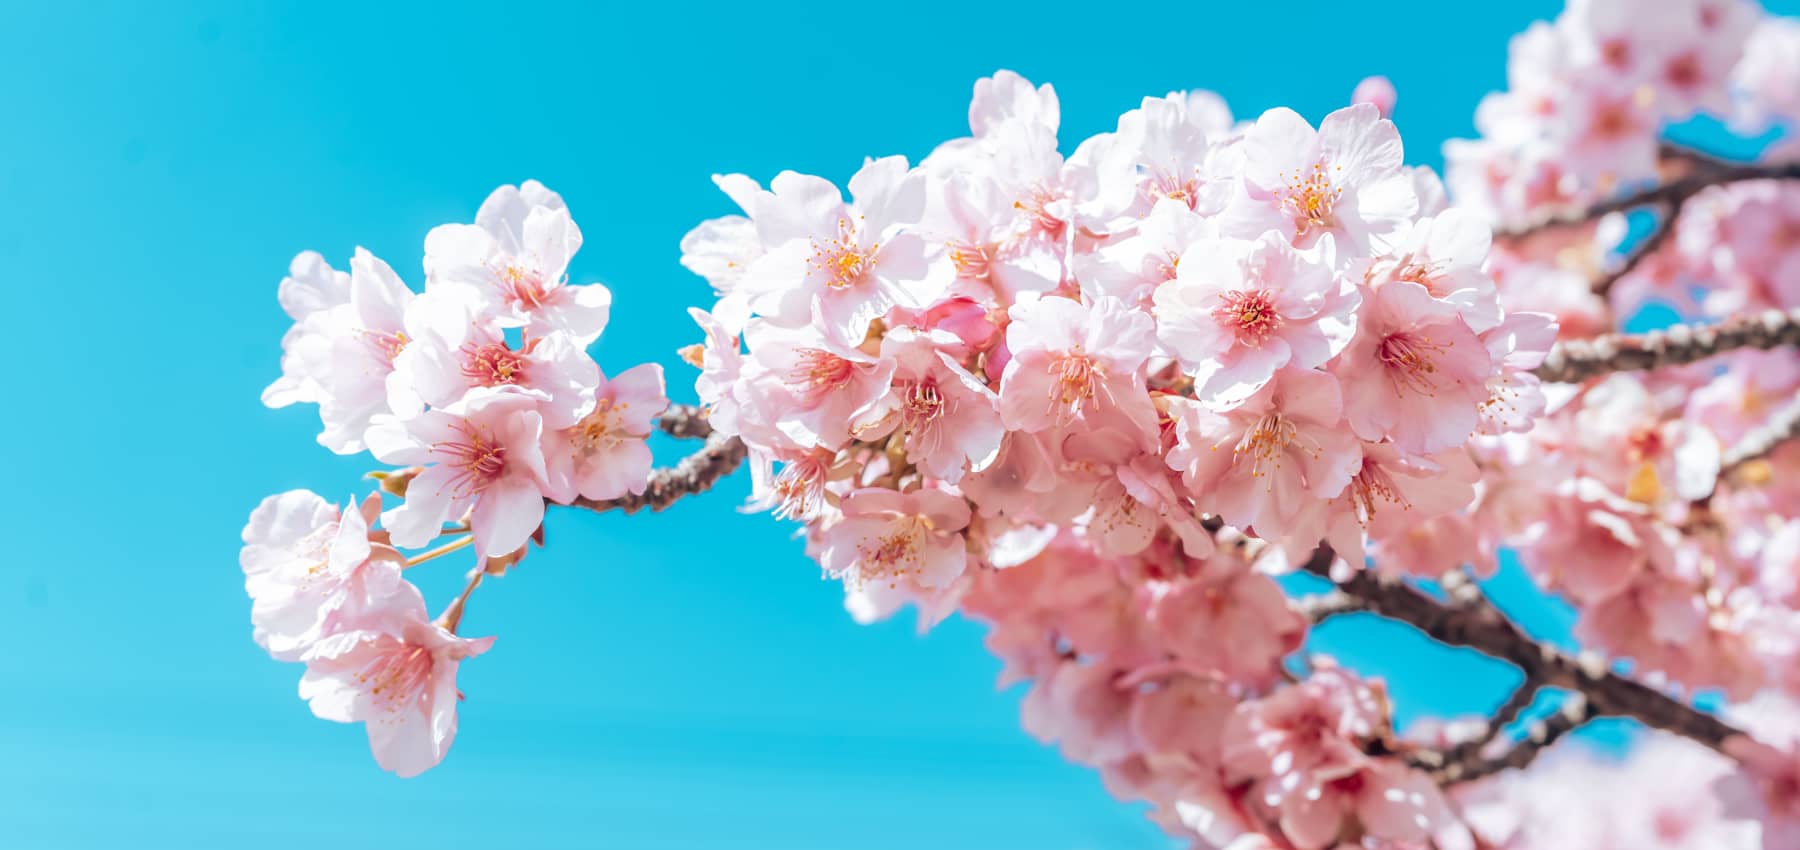 A guide to the different types of sakura in Japan - Go! Go! Nihon